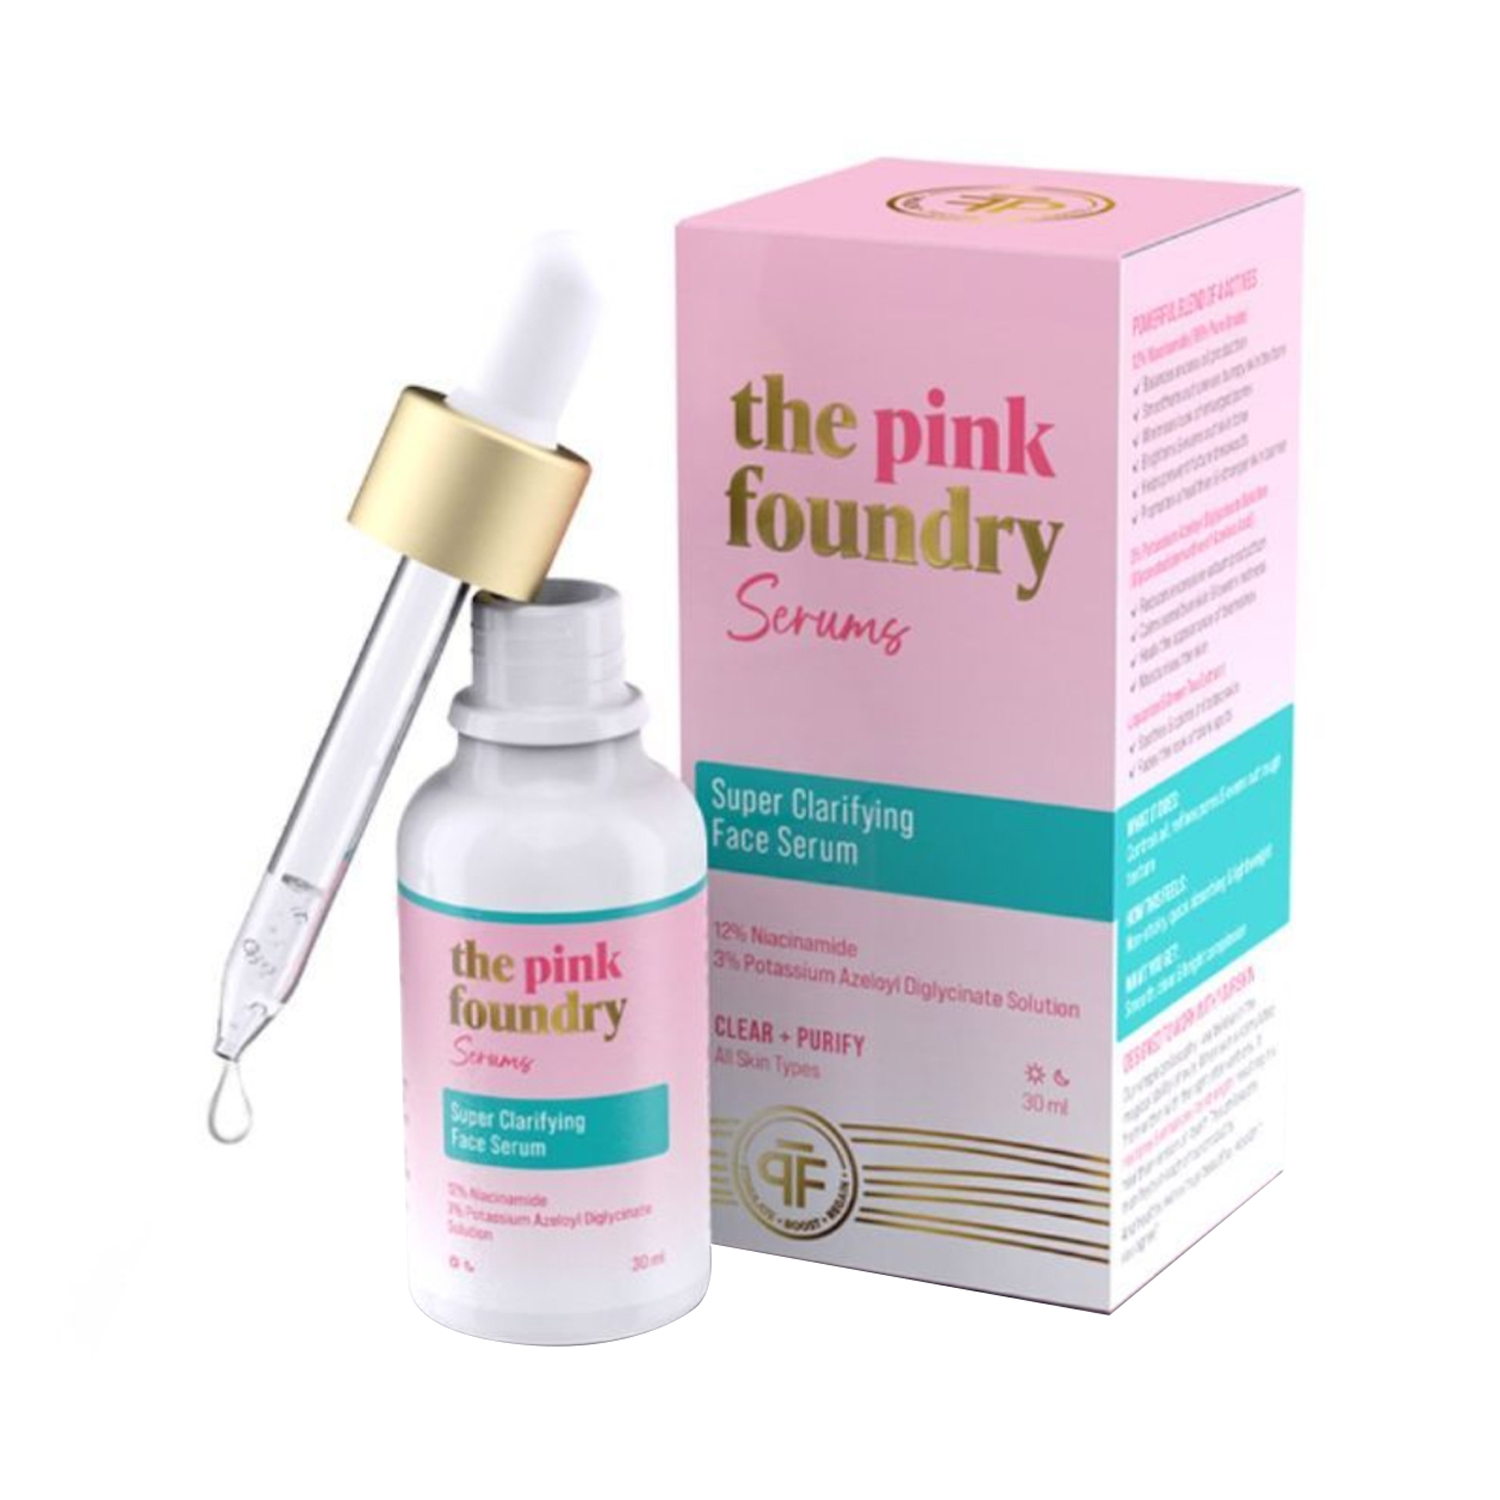 The Pink Foundry | The Pink Foundry 12% Niacinamide Super Clarifying Face Serum (30ml)